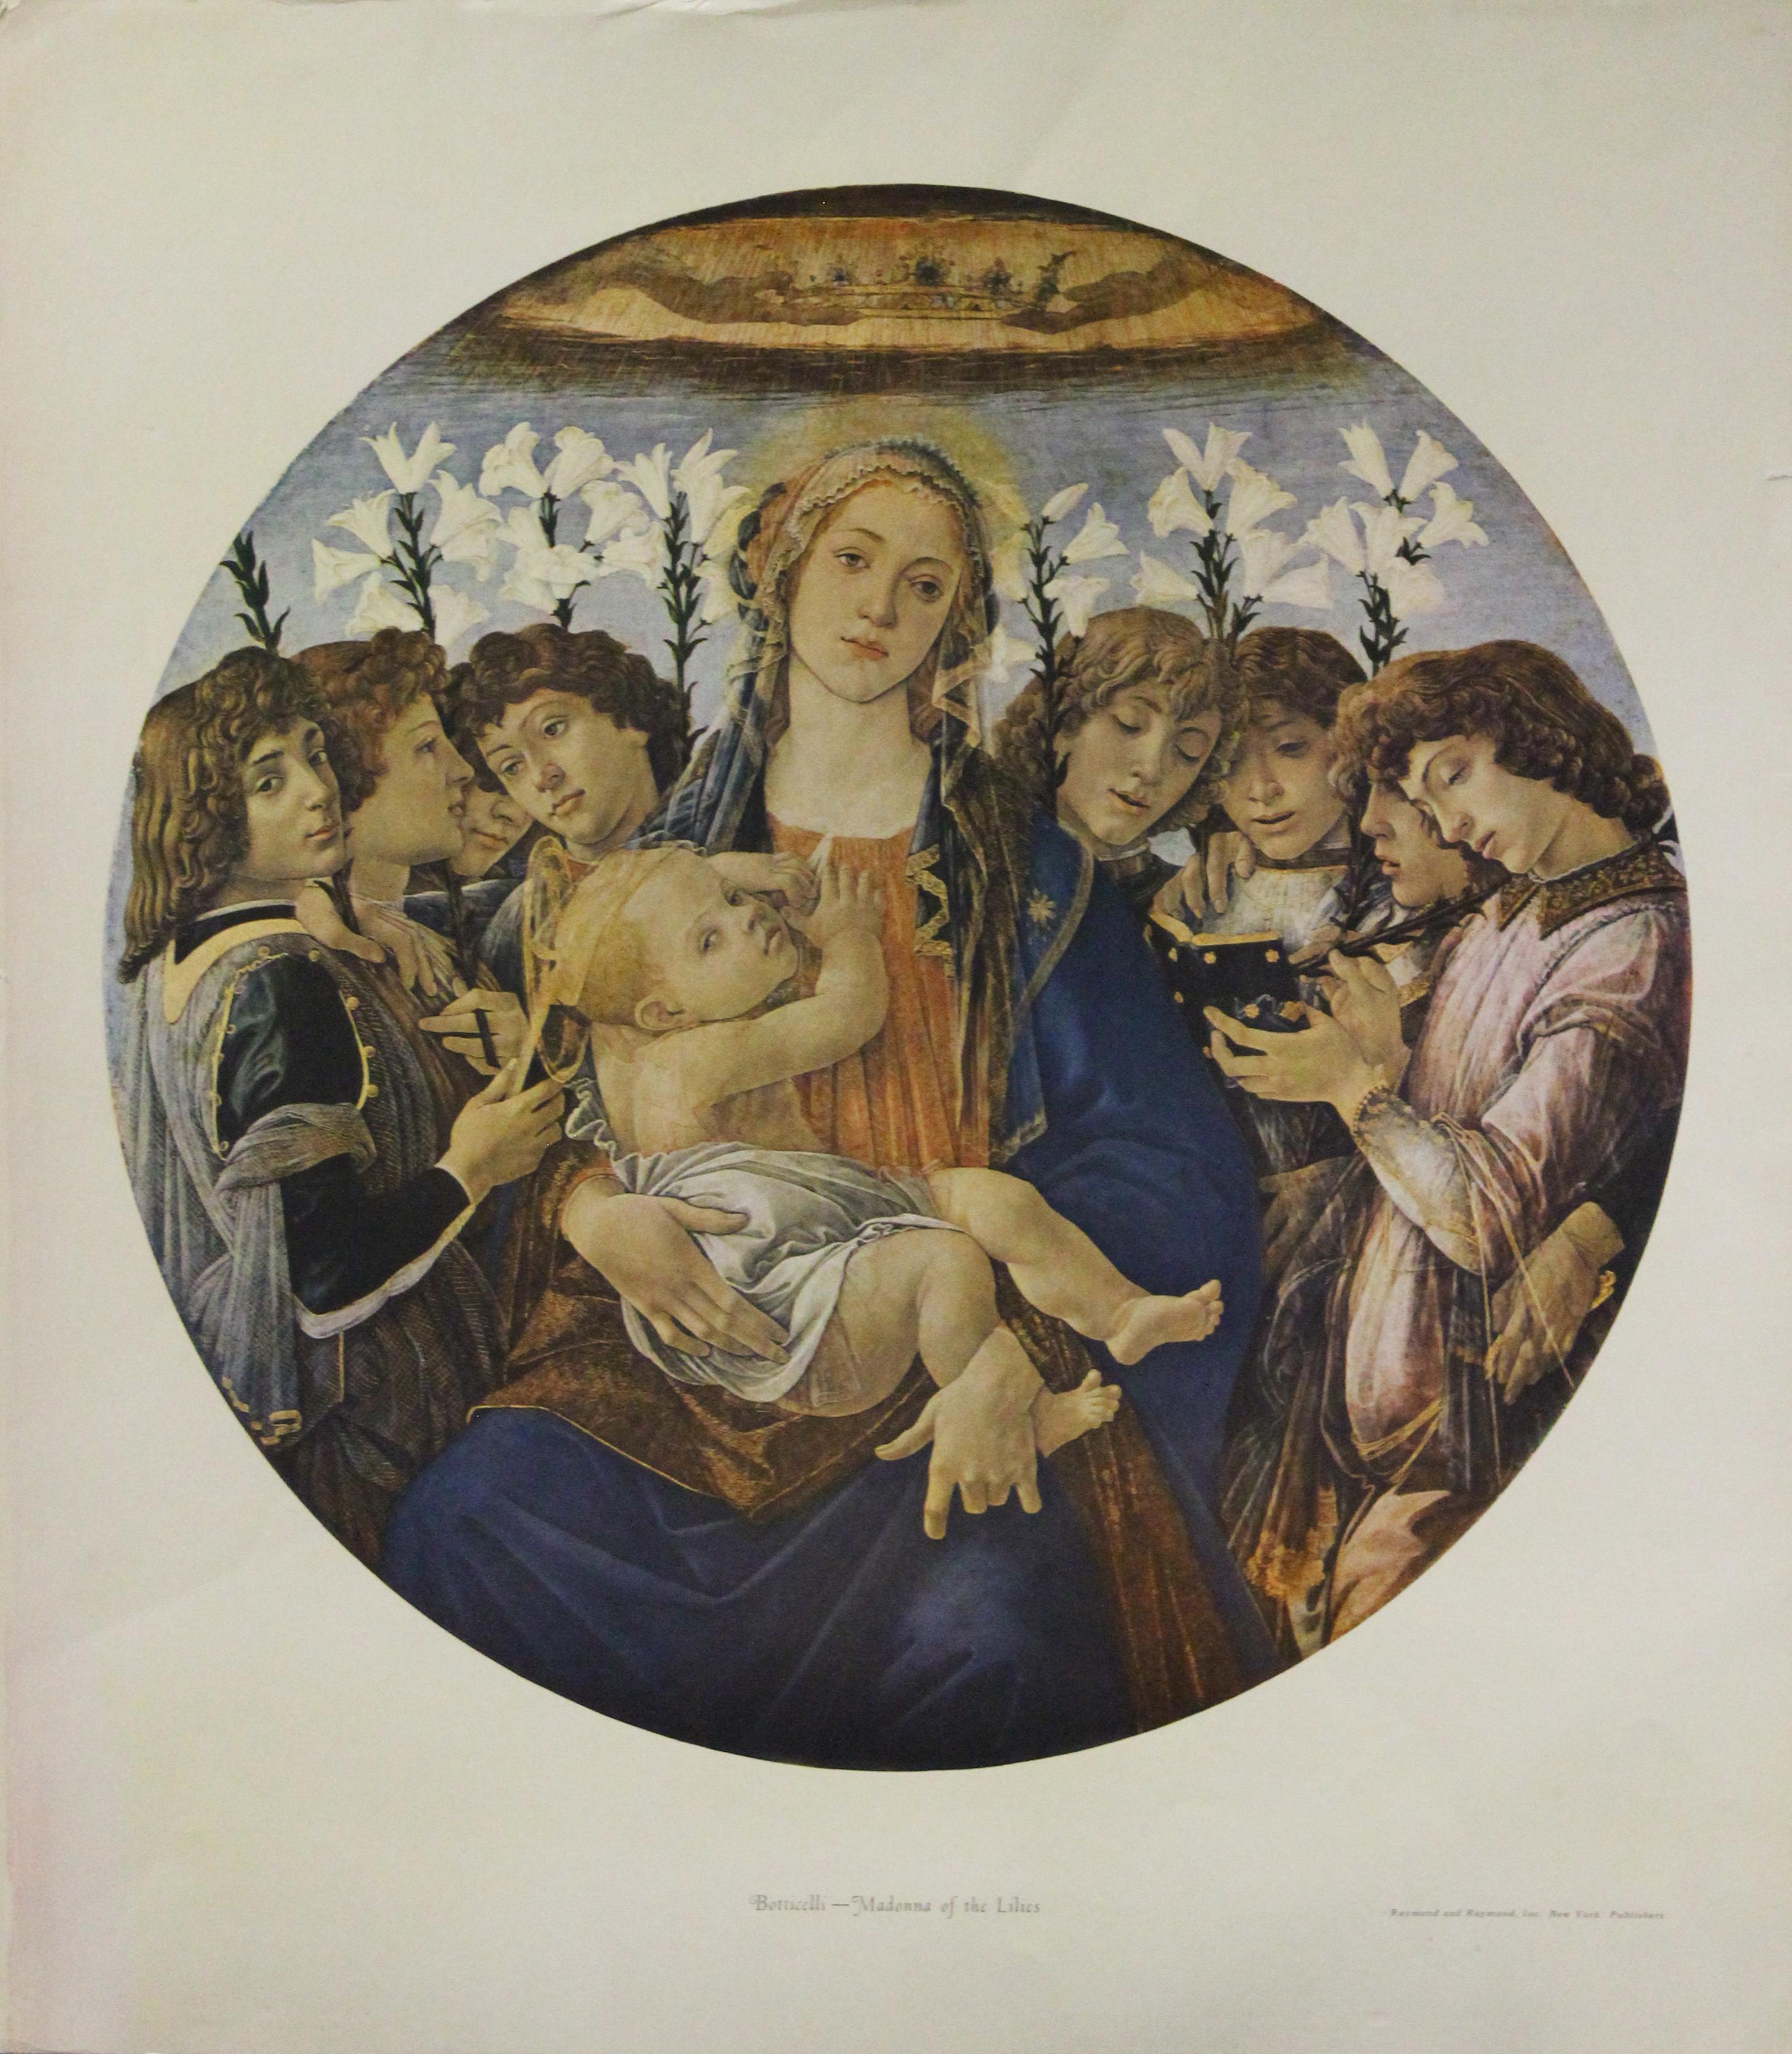 (After) Sandro Botticelli Portrait Print - Madonna of the Lilies-Poster. Published by Raymond and Raymond, Inc. New York.